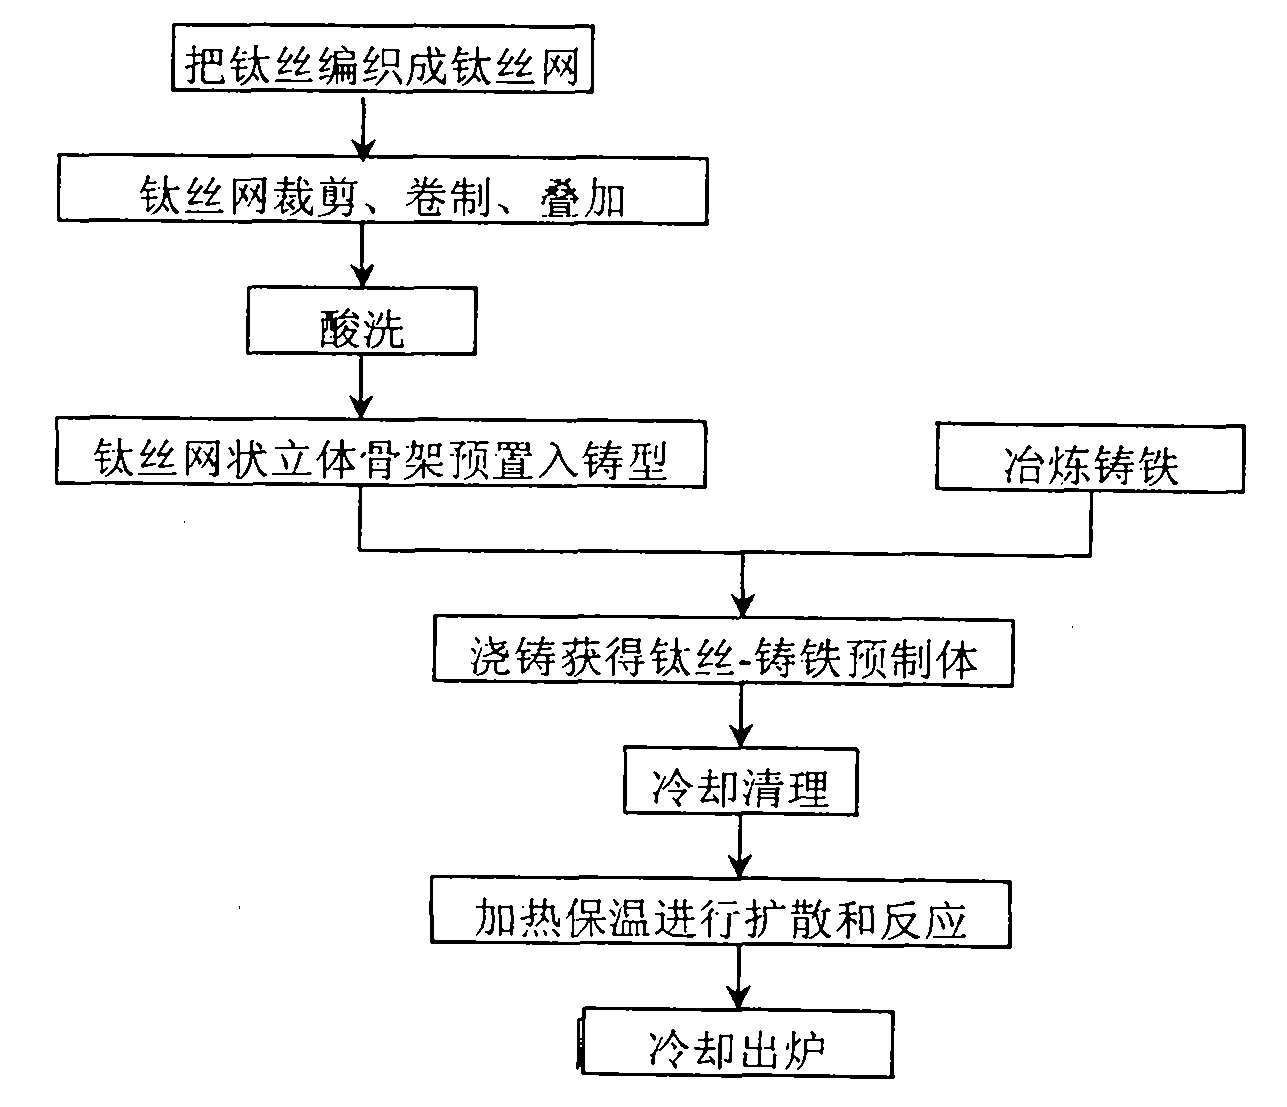 In-situ synthesizing and compounding method of desilting tip